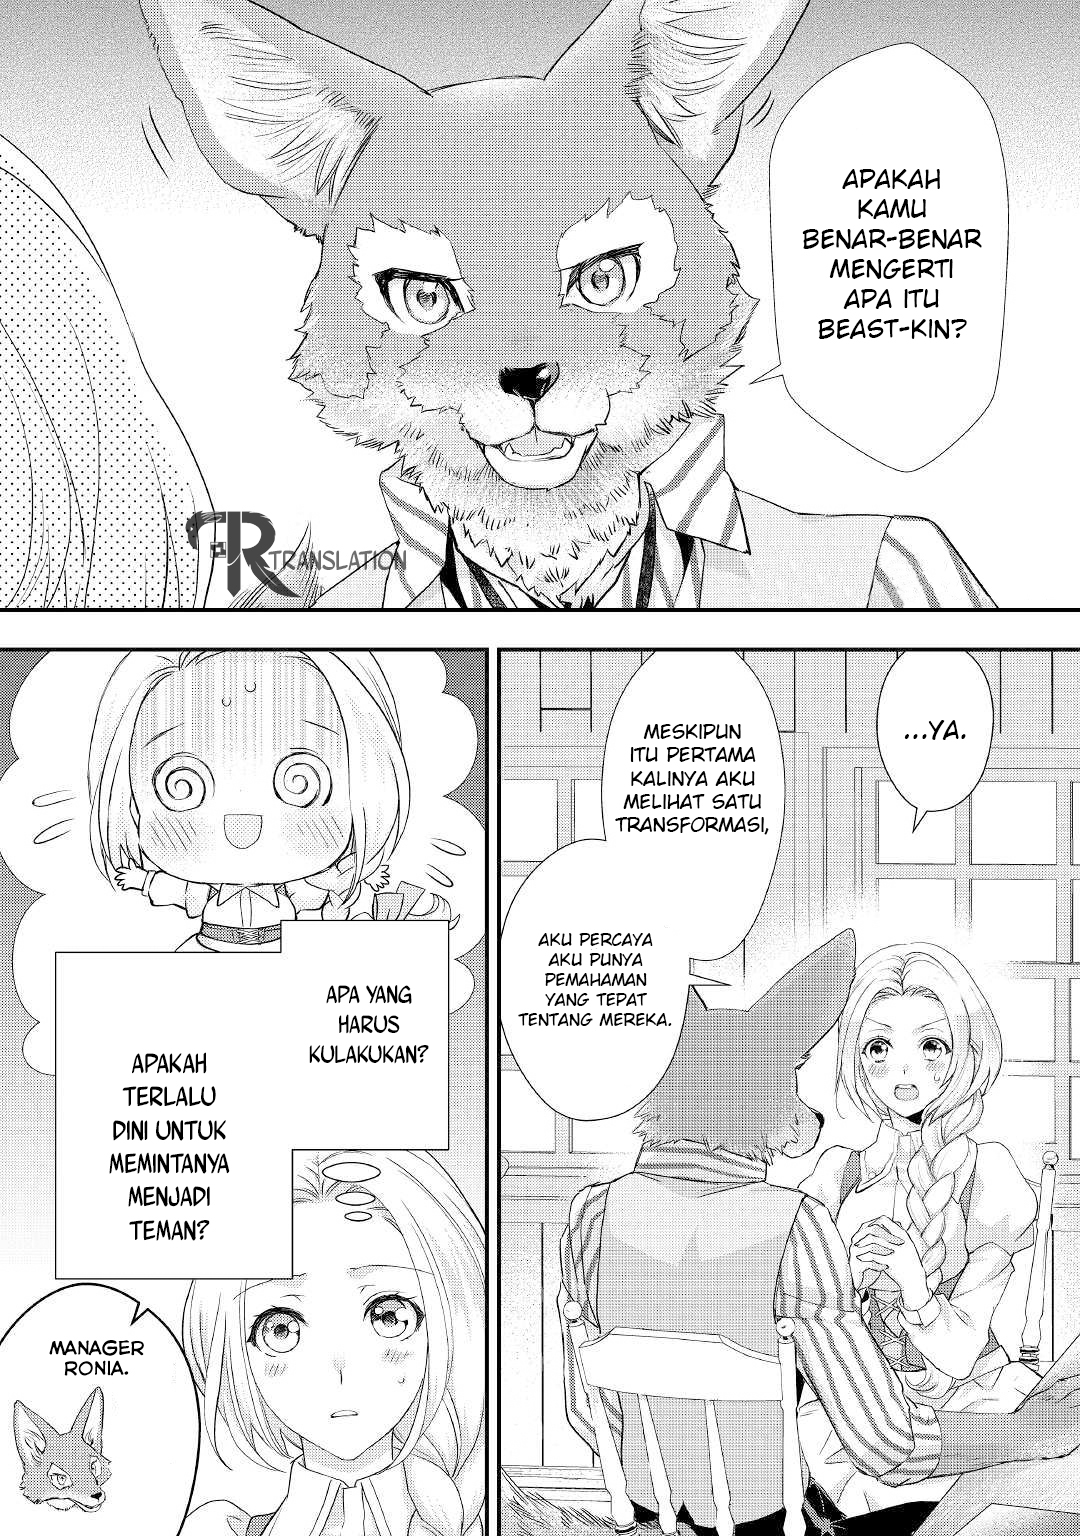 Milady Just Wants to Relax Chapter 010.1